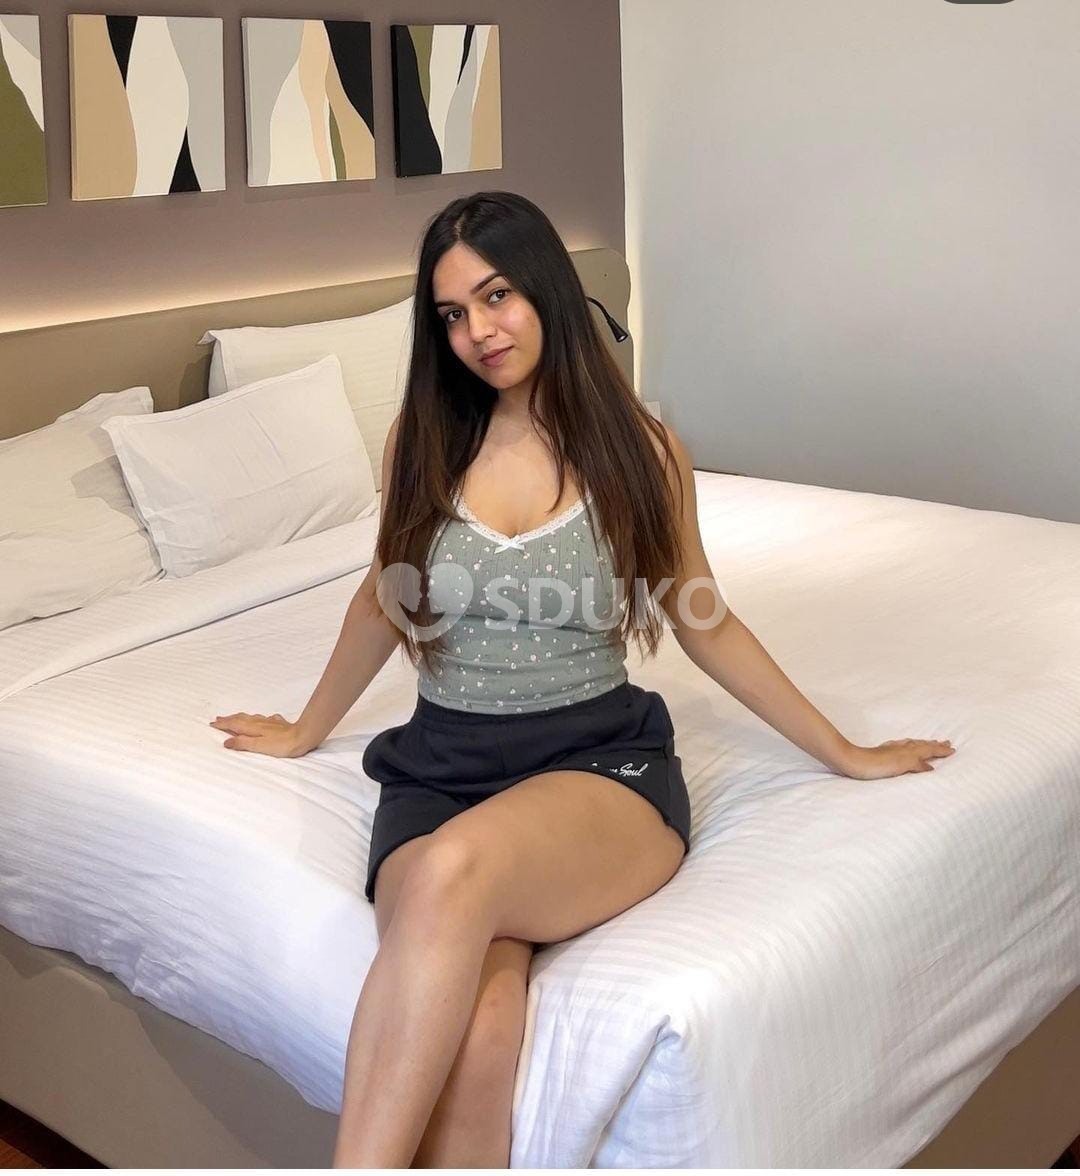 Kr Puram........low price 🥰100% SAFE AND SECURE TODAY LOW PRICE UNLIMITED ENJOY HOT COLLEGE GIRL HOUSEWIFE AUNTIES AV